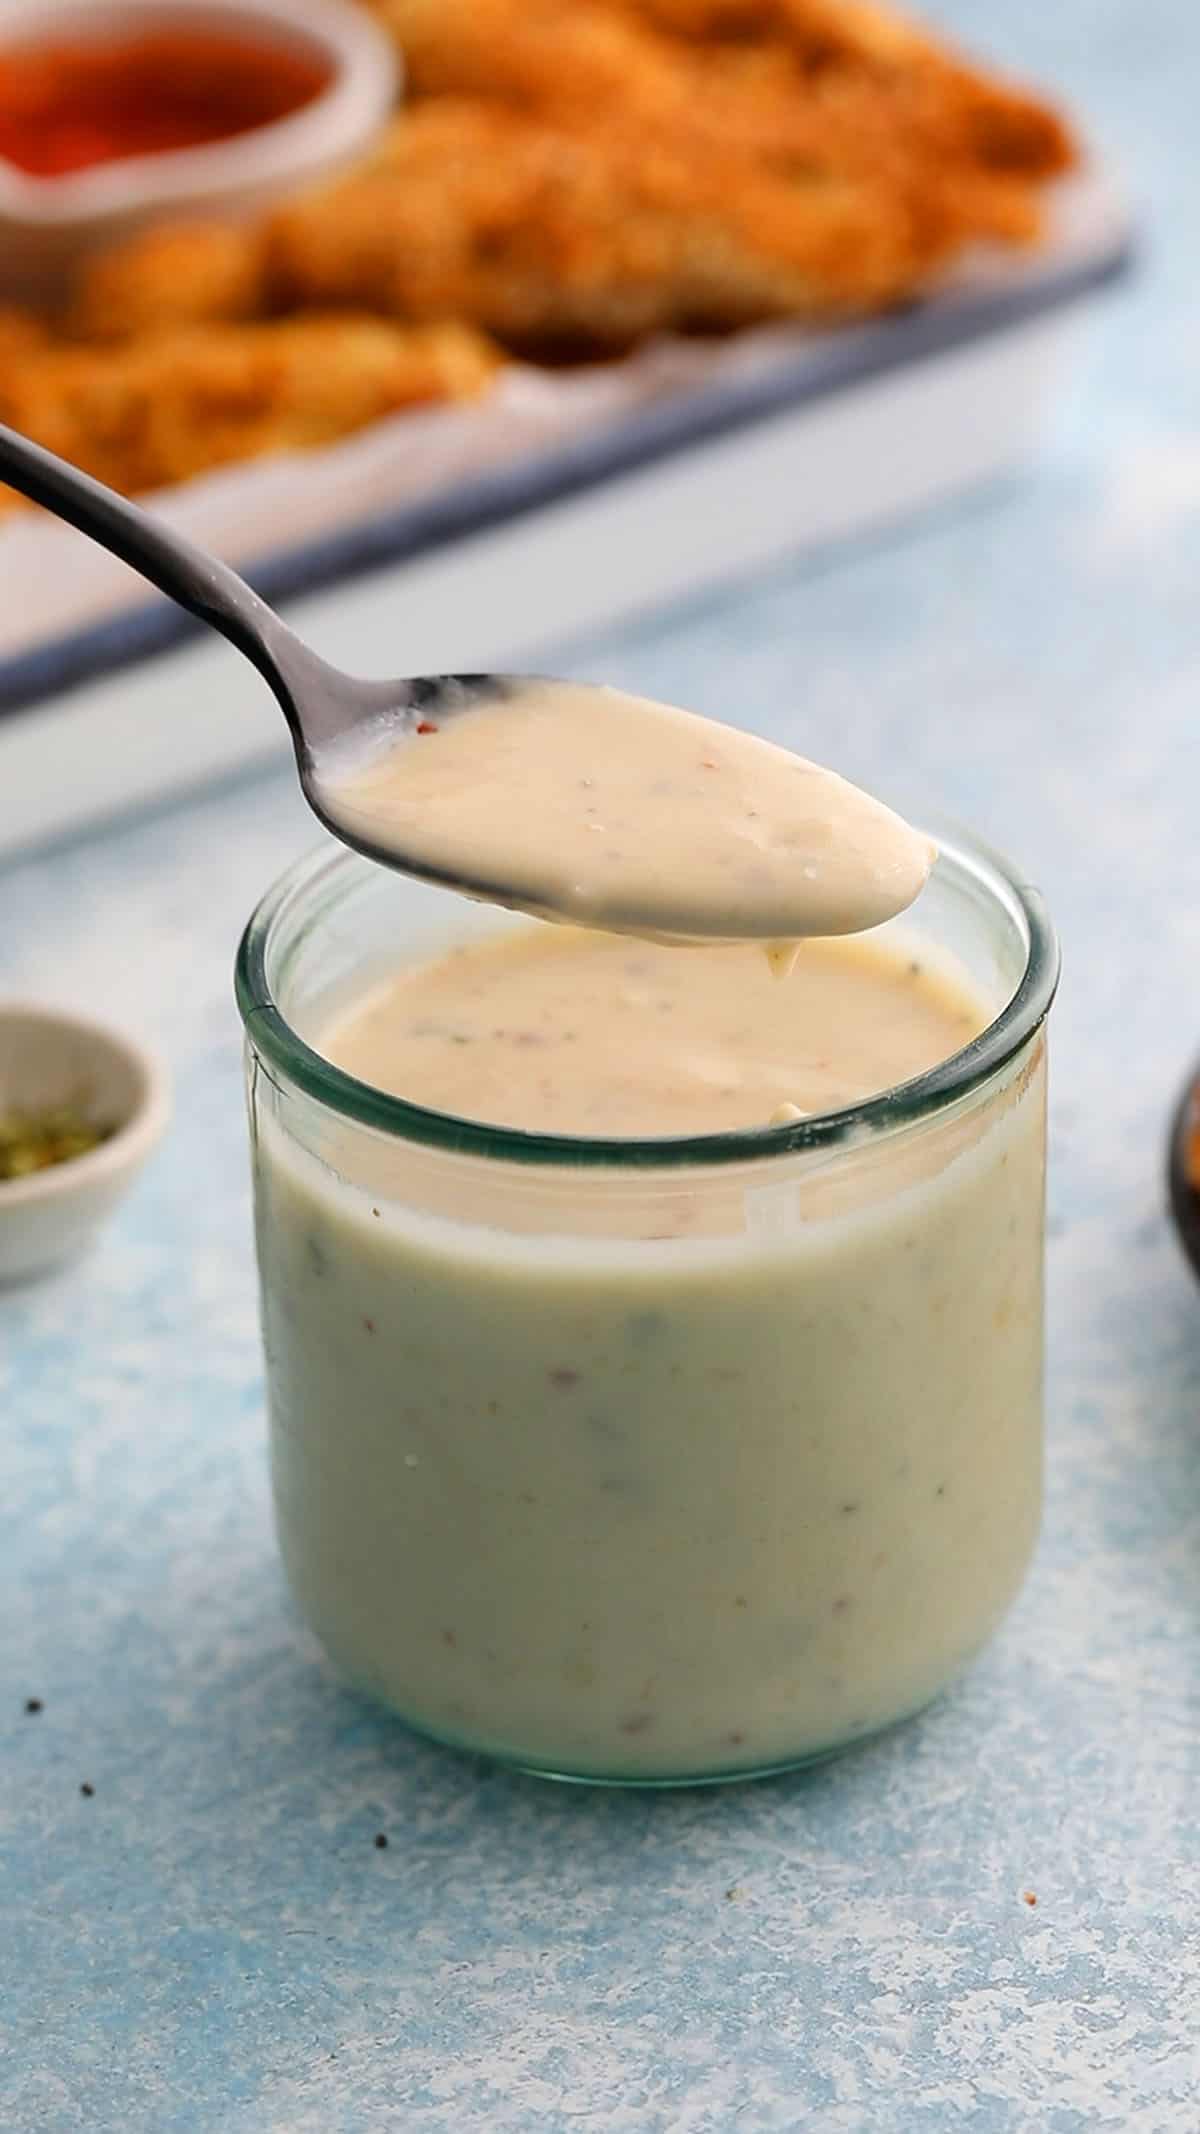 a spoonful of white sauce above a glass jar filled with the same.